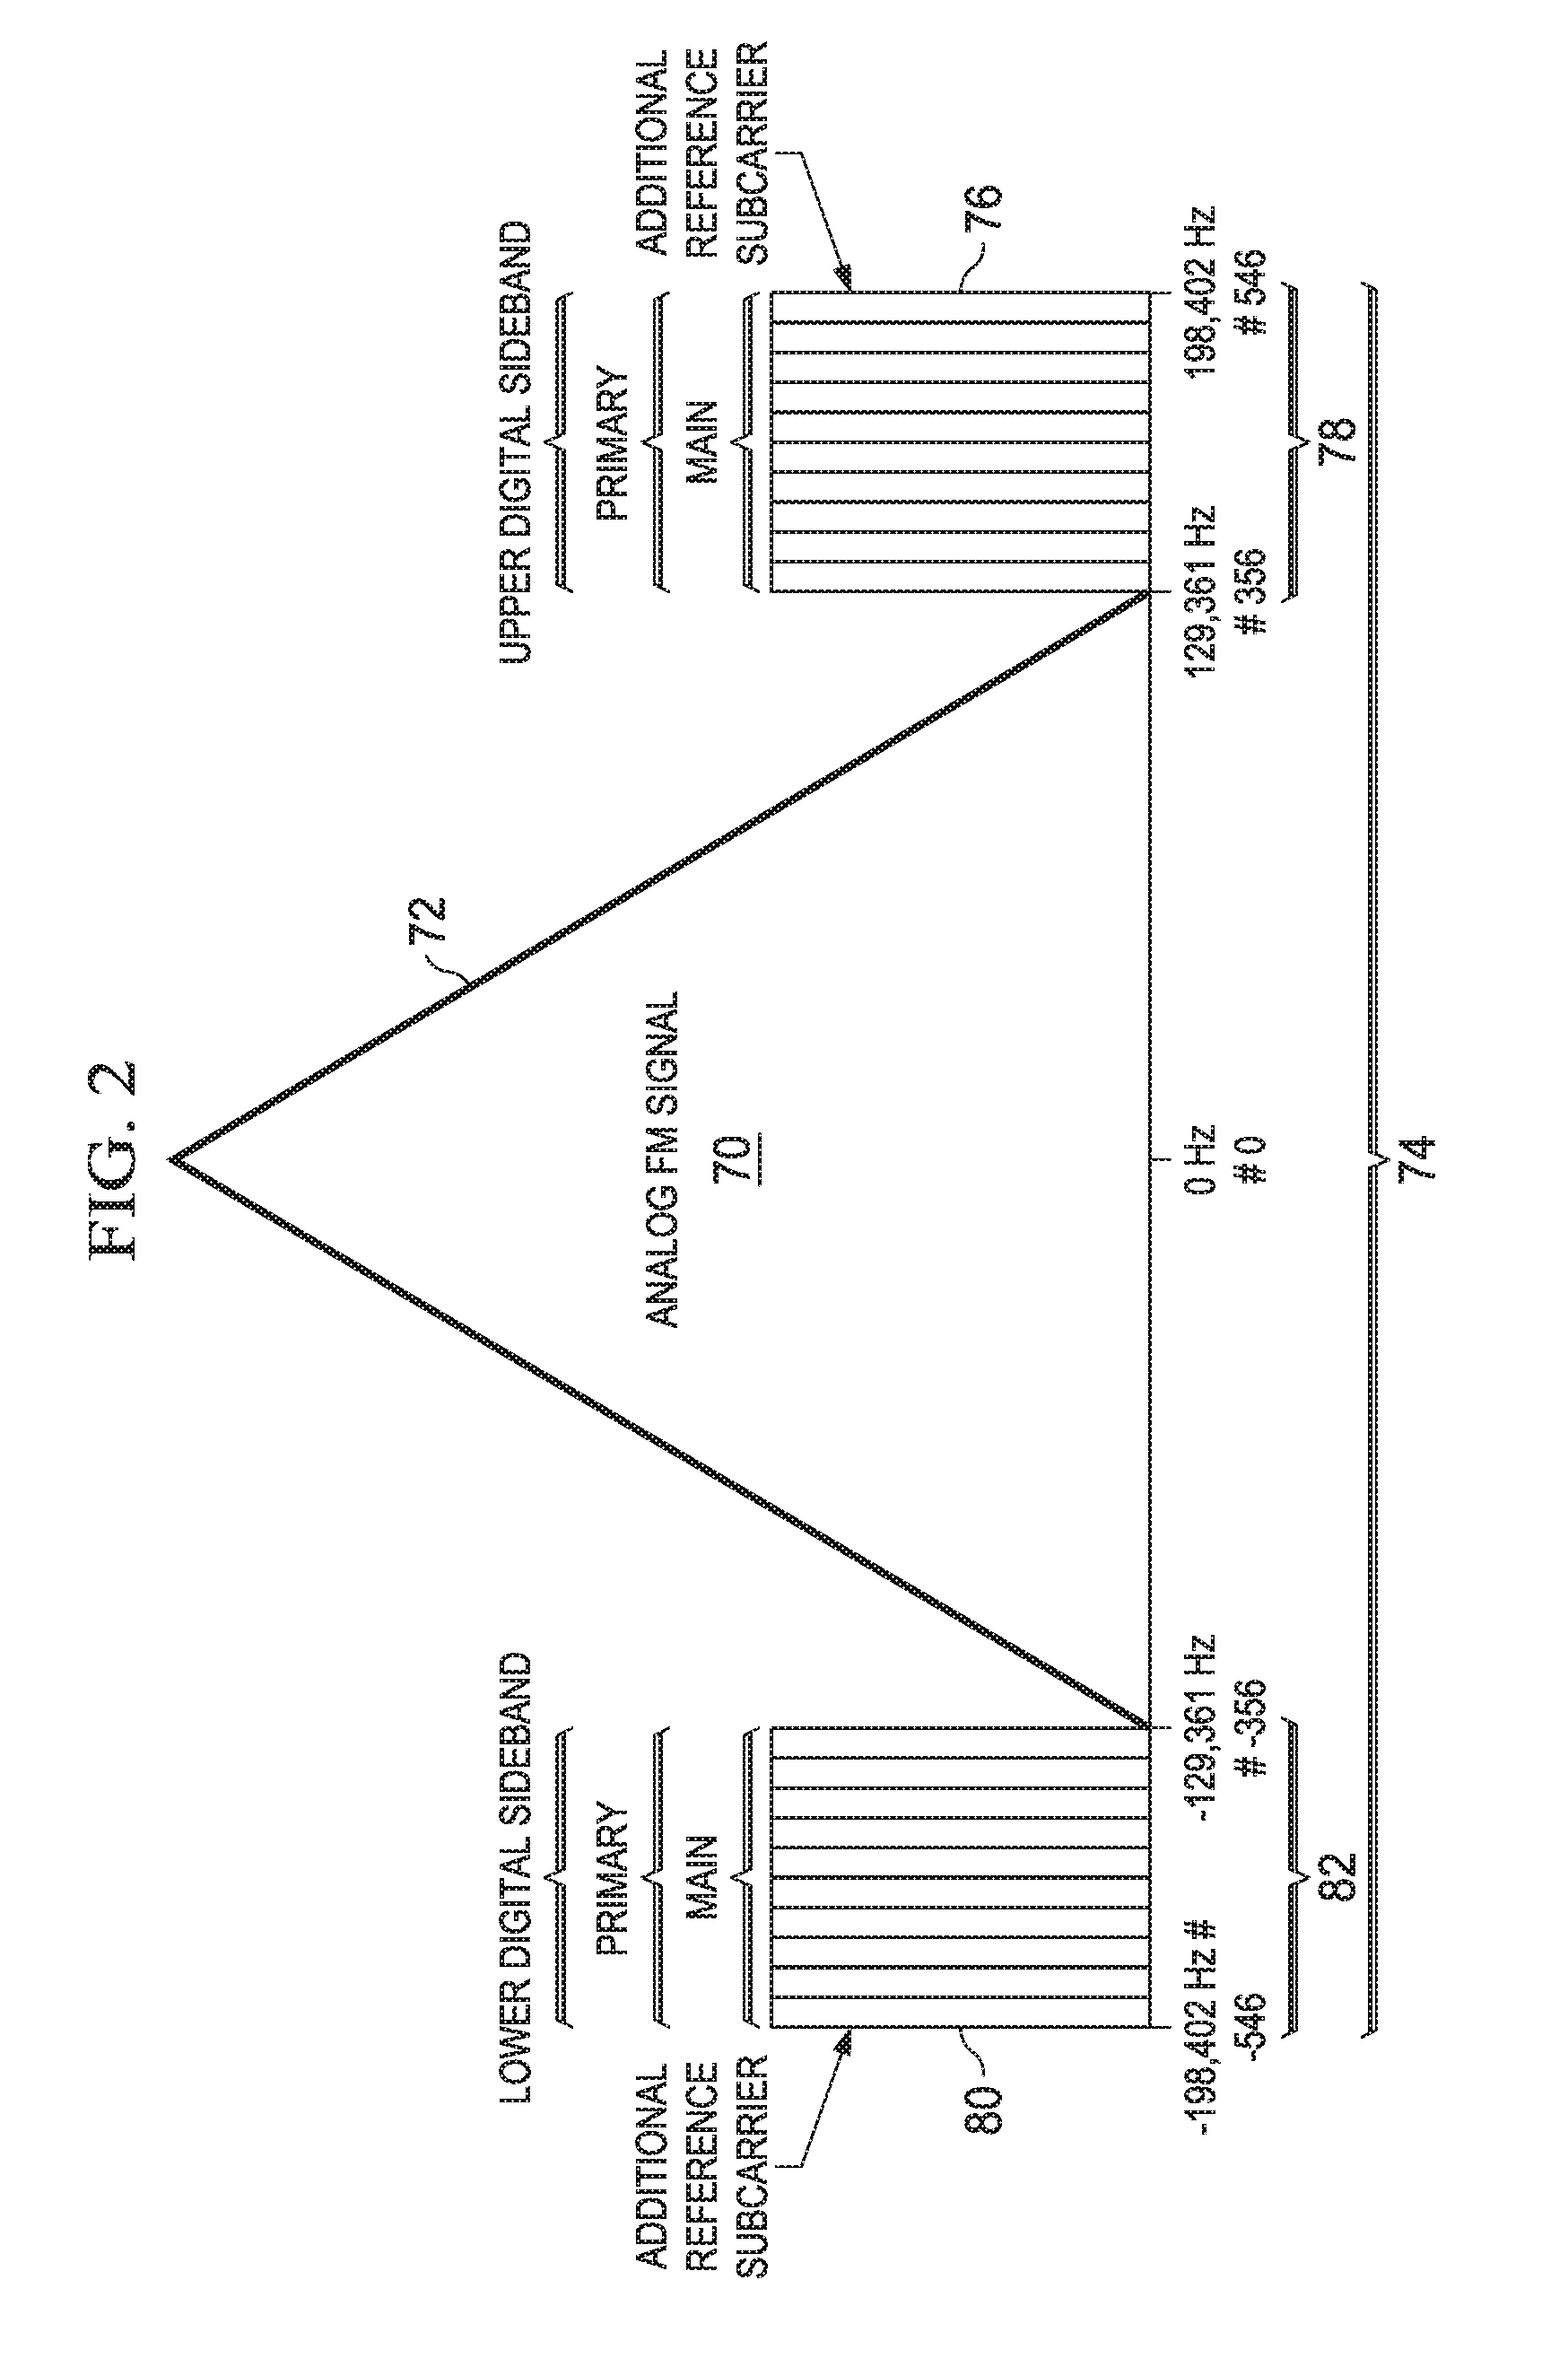 Method and Apparatus for Analog and Digital Audio Blend for HD Radio Receivers